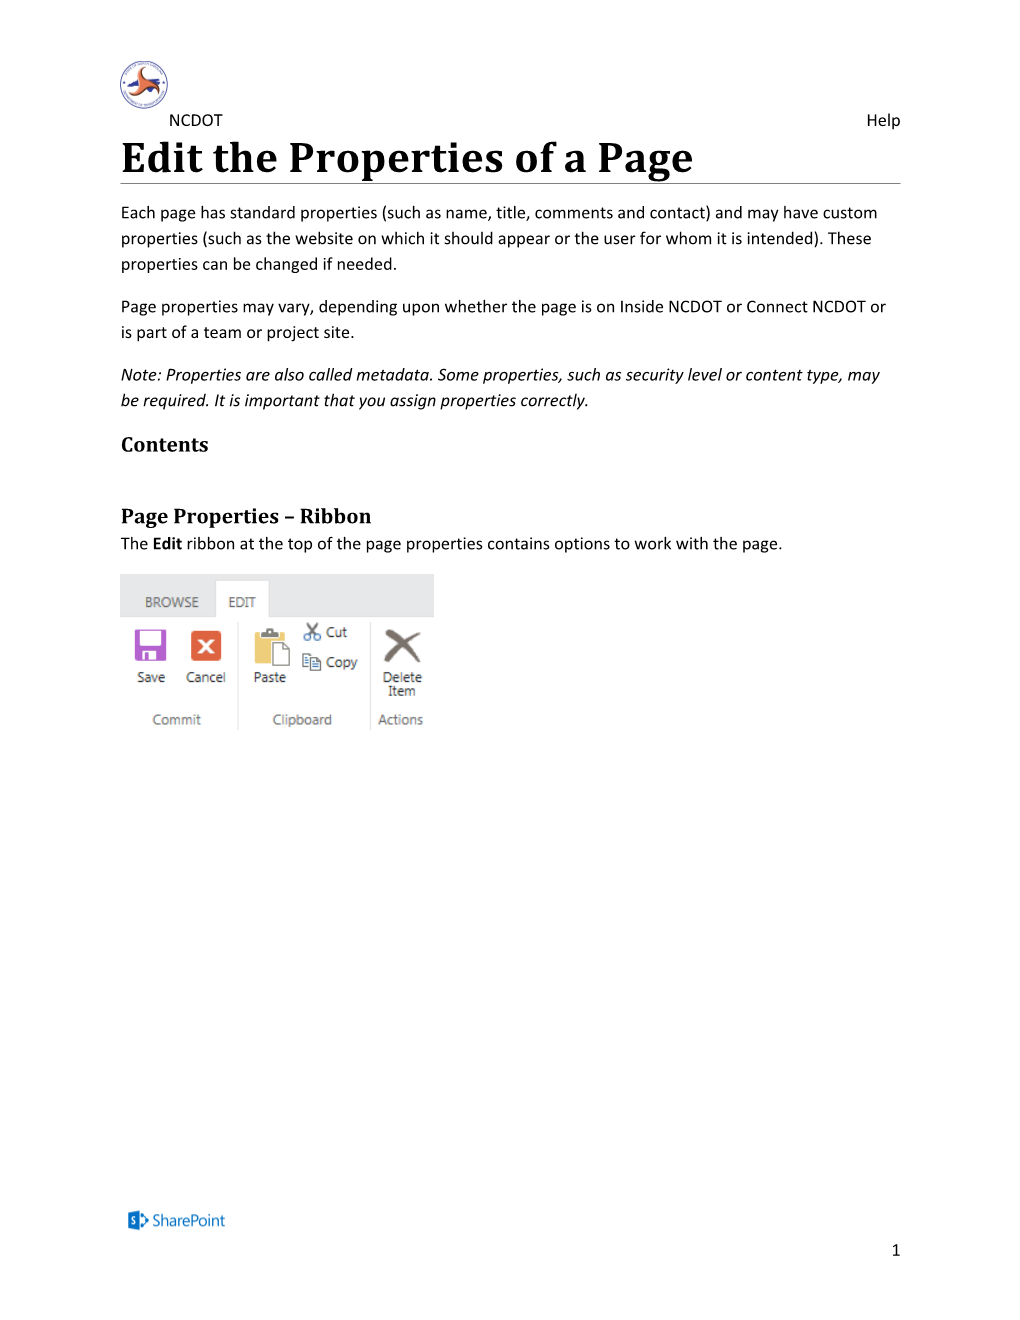 Edit the Properties of a Page (D)